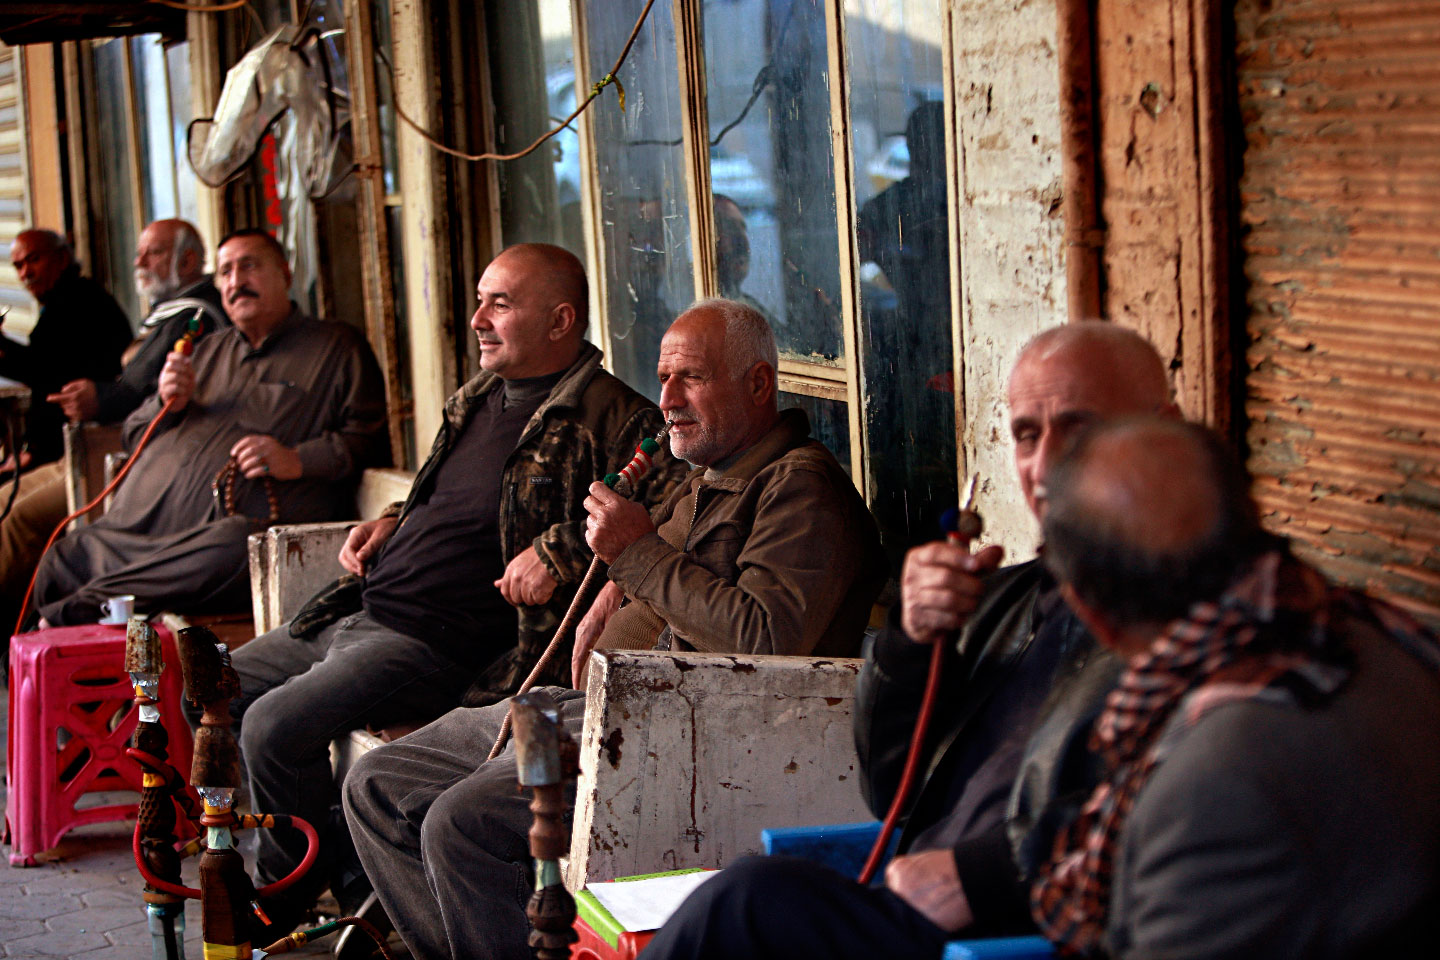 Patrons sit outside Hassan Ajami cafe in al-Rasheed street, the oldest street in Baghdad, Iraq, Saturday, March 2, 2019.